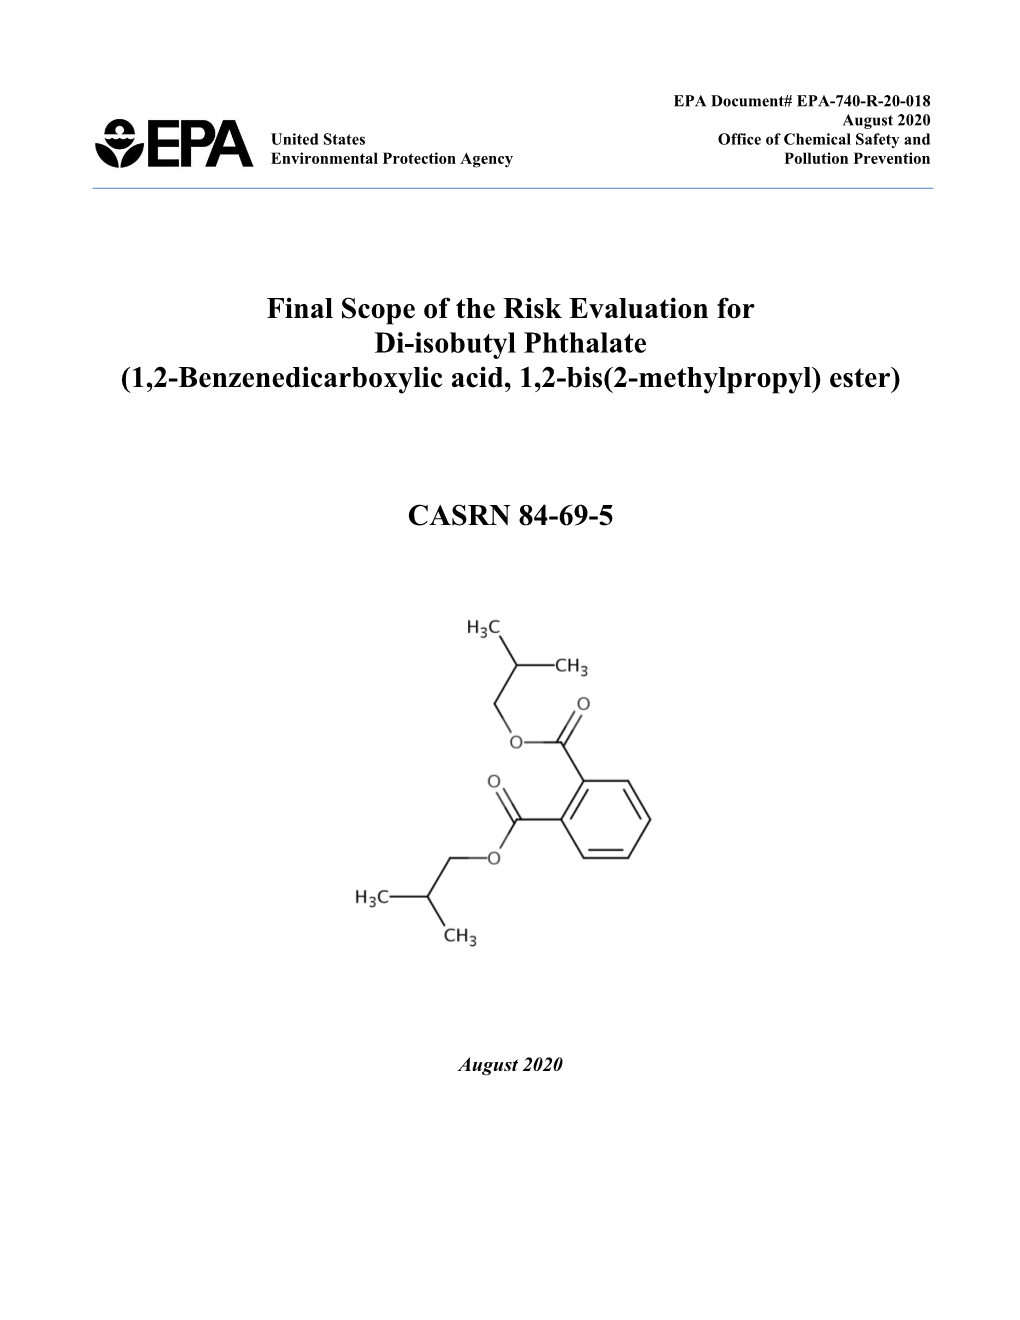 Final Scope of the Risk Evaluation for Di-Isobutyl Phthalate (1,2-Benzenedicarboxylic Acid, 1,2-Bis(2-Methylpropyl) Ester)